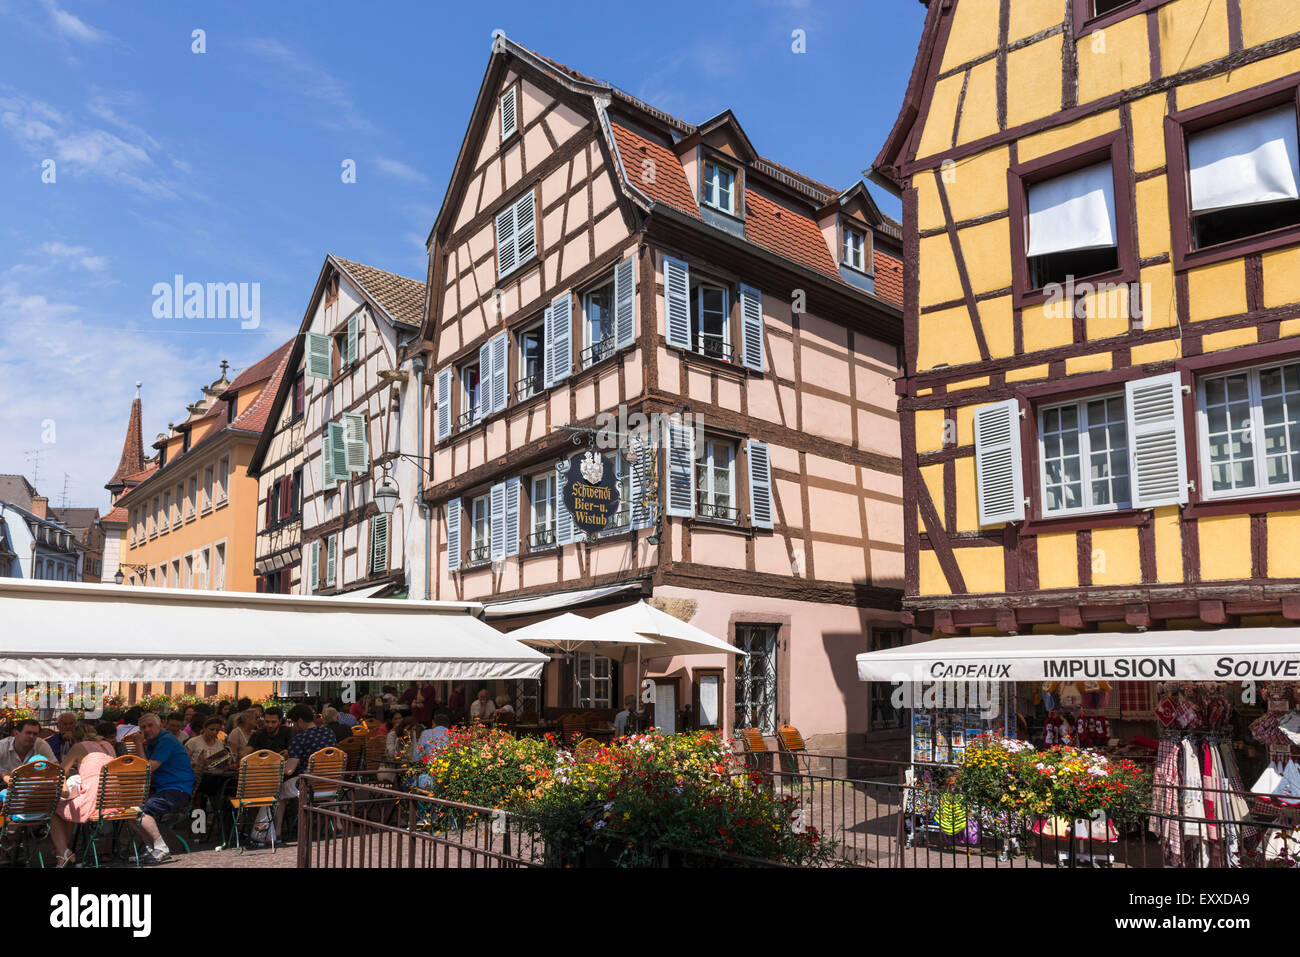 Cafe bar and medieval buildings in the Old Town in Colmar, Alsace, France, Europe Stock Photo